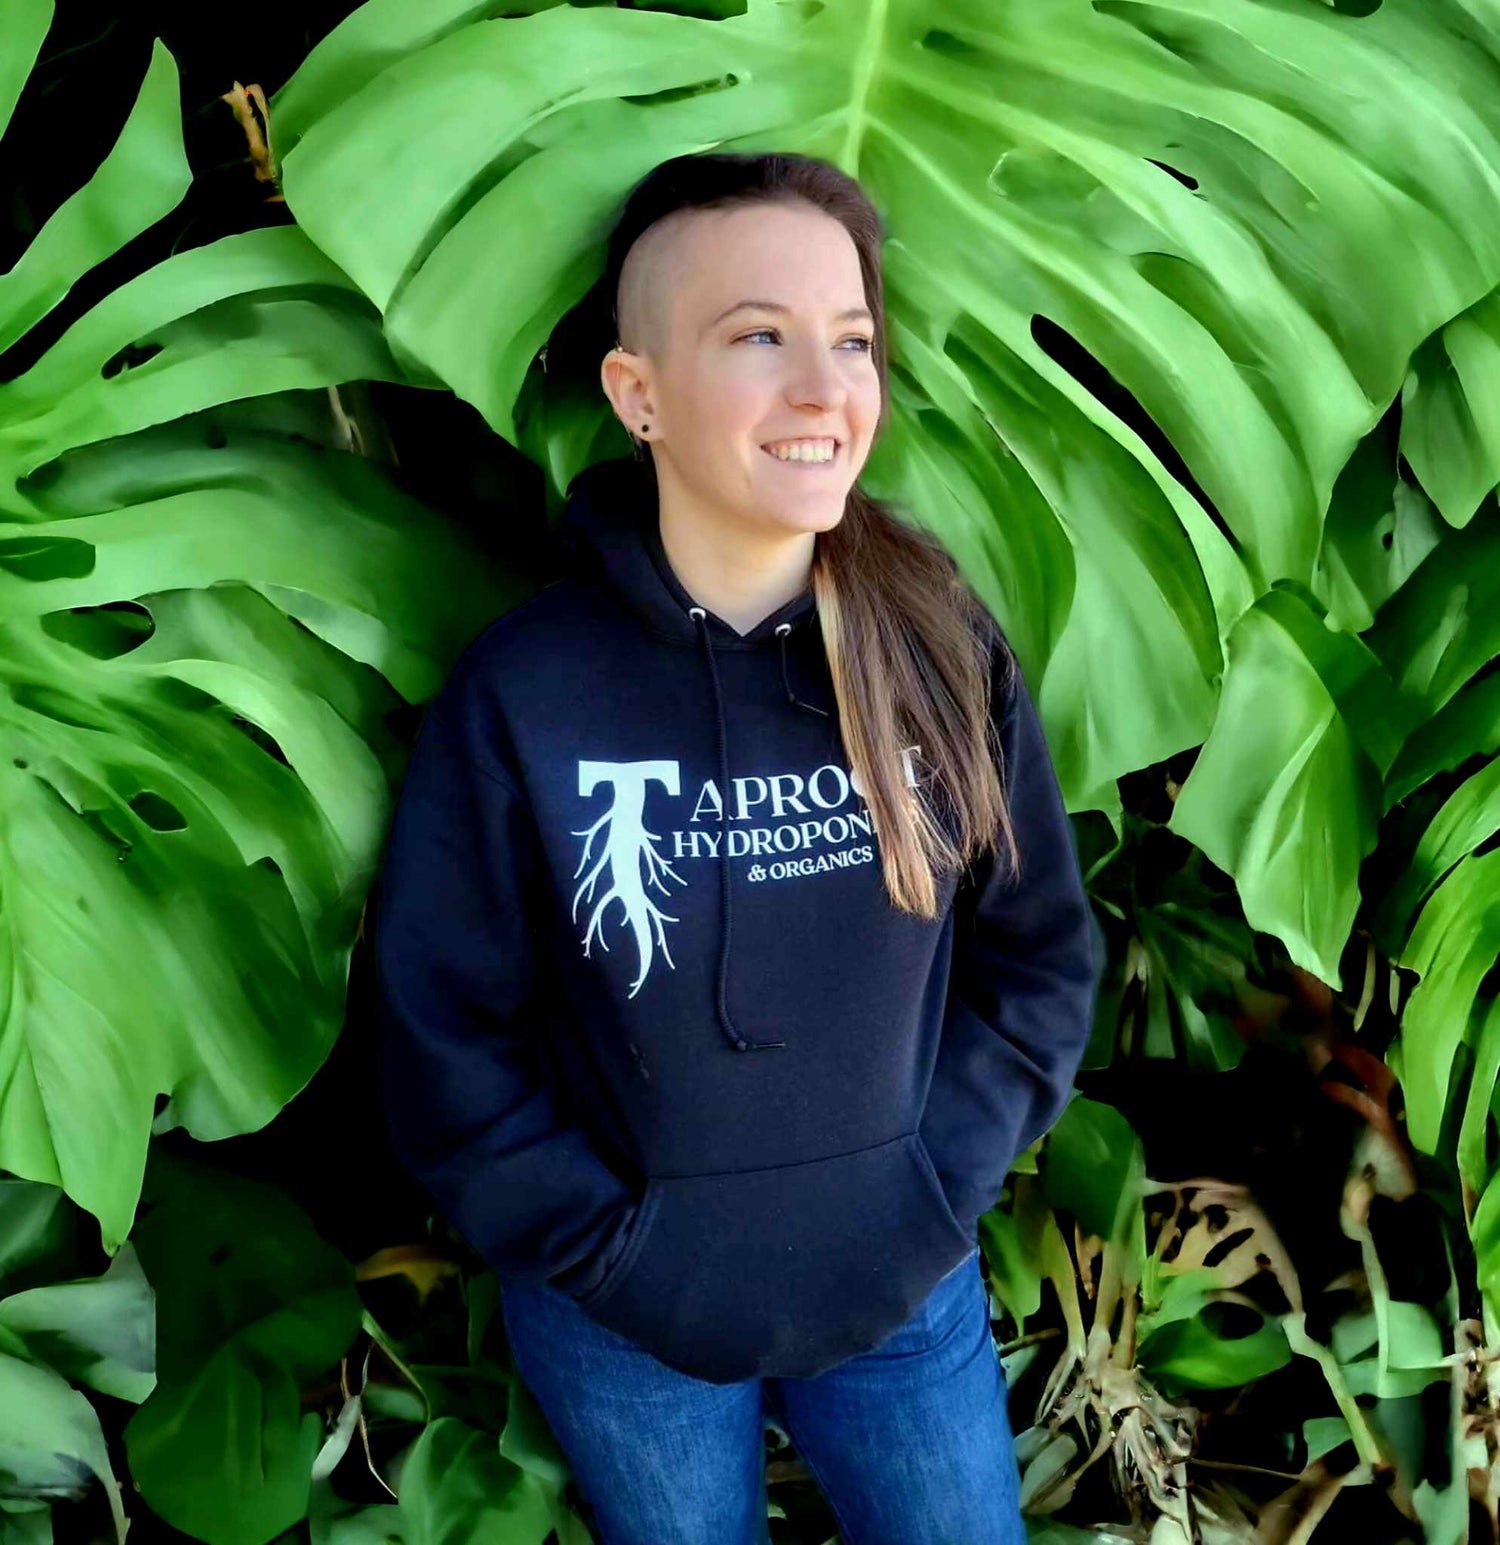 Image: Person in Taproot Hoodie smiling, standing in front of large plant leaf background